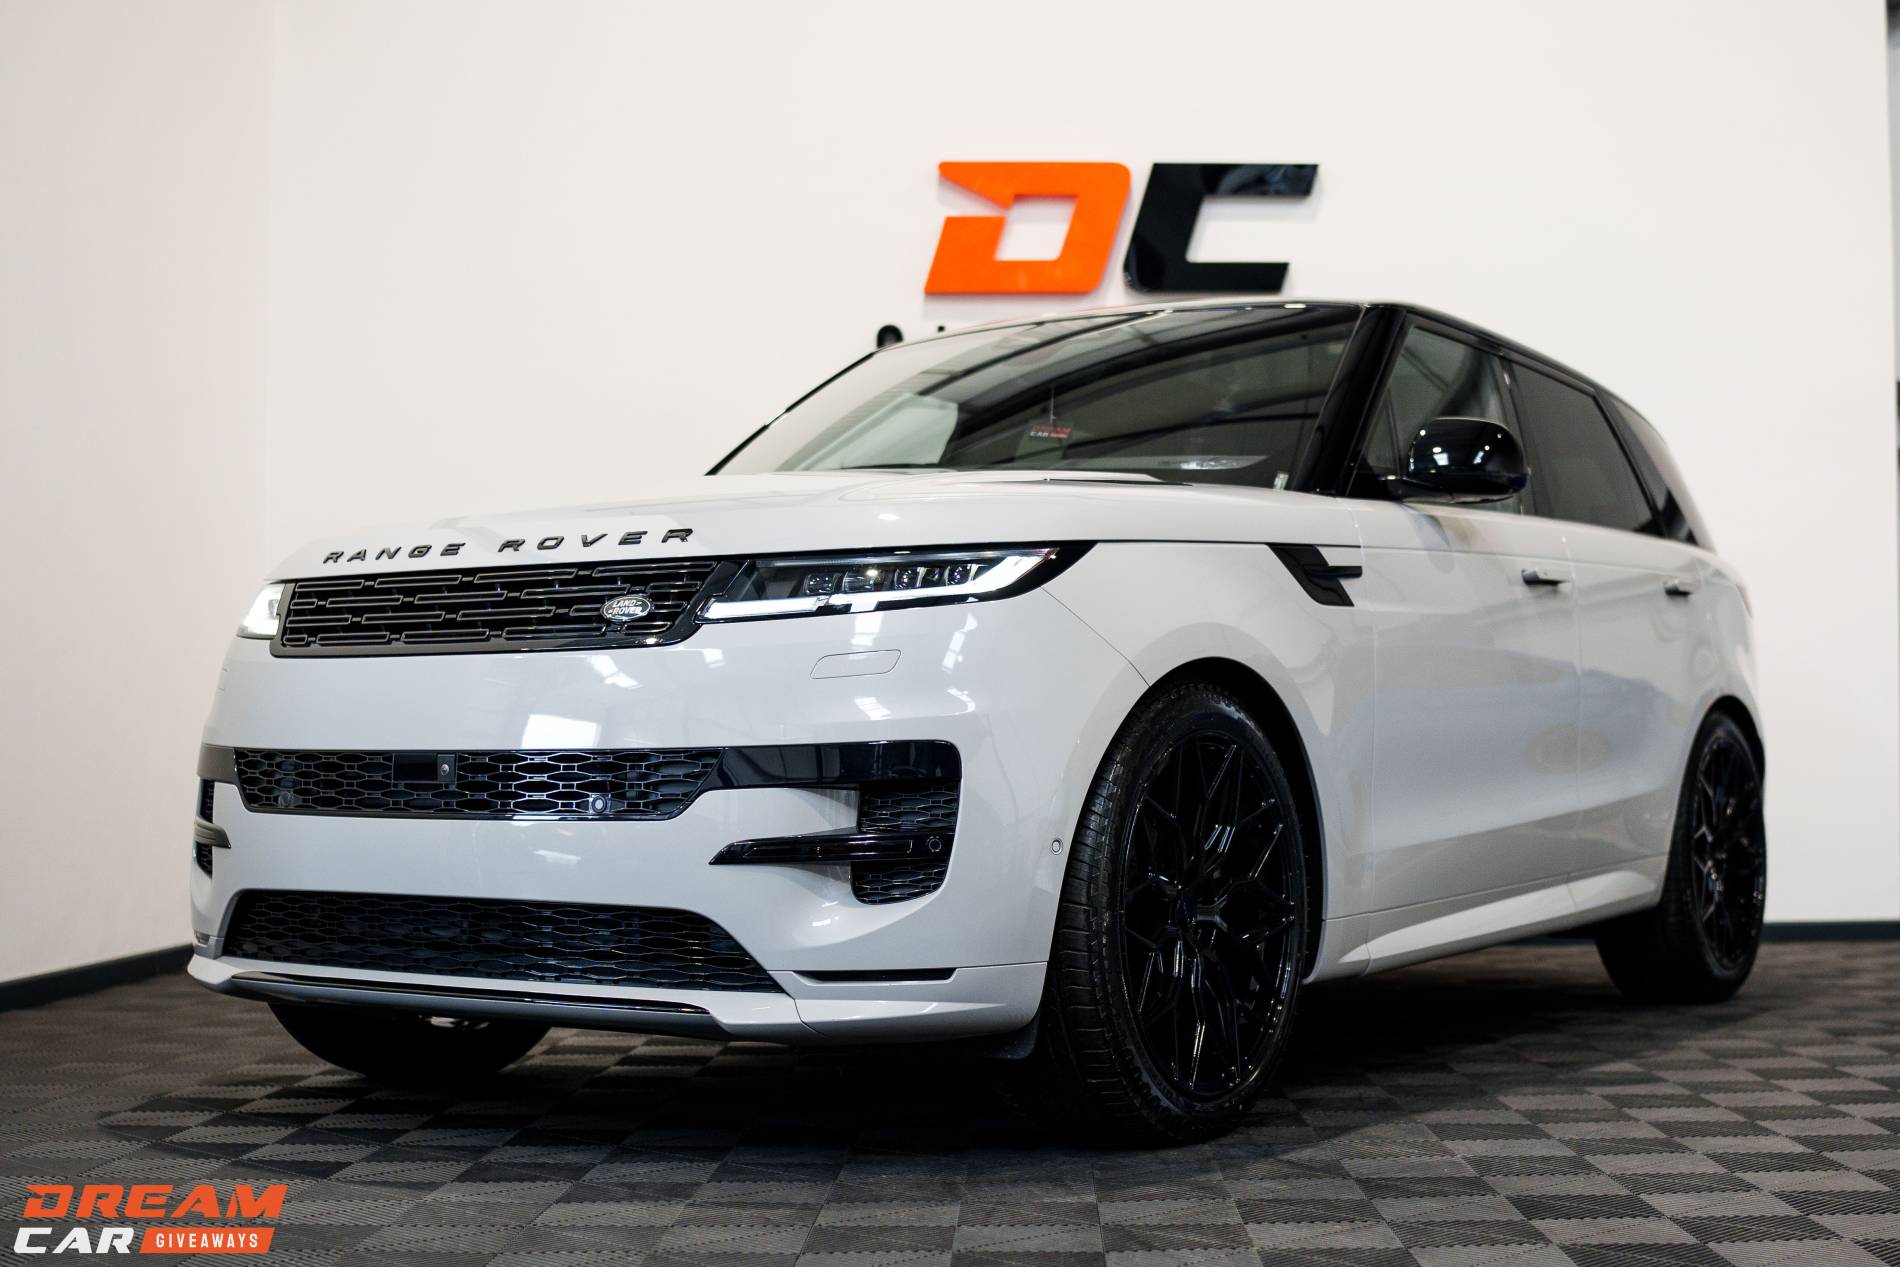 Win this 2022 Range Rover Sport & £2,500 or £75,000 Tax Free